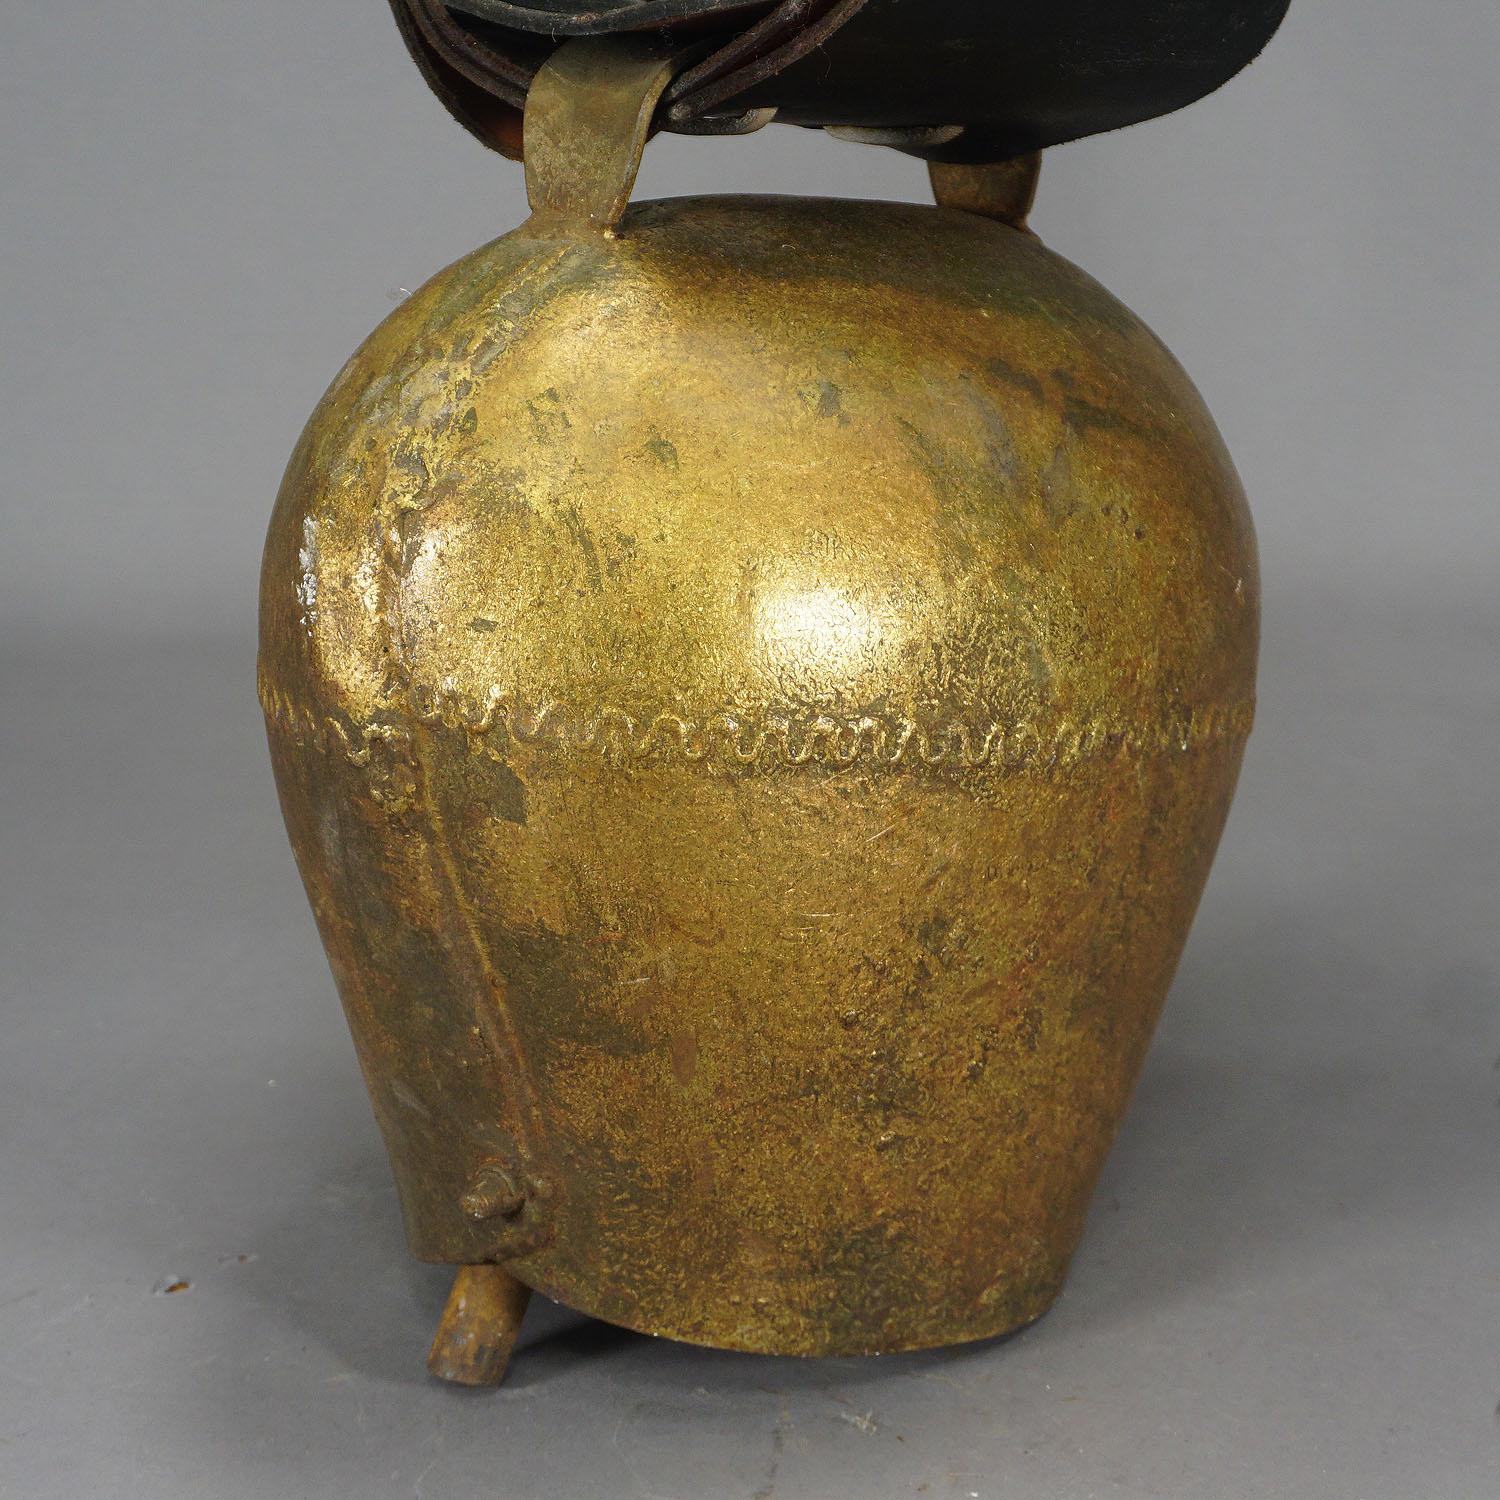 Forged Vintage Swiss Handforged Cow Bell with Leather Strap, ca. 1920